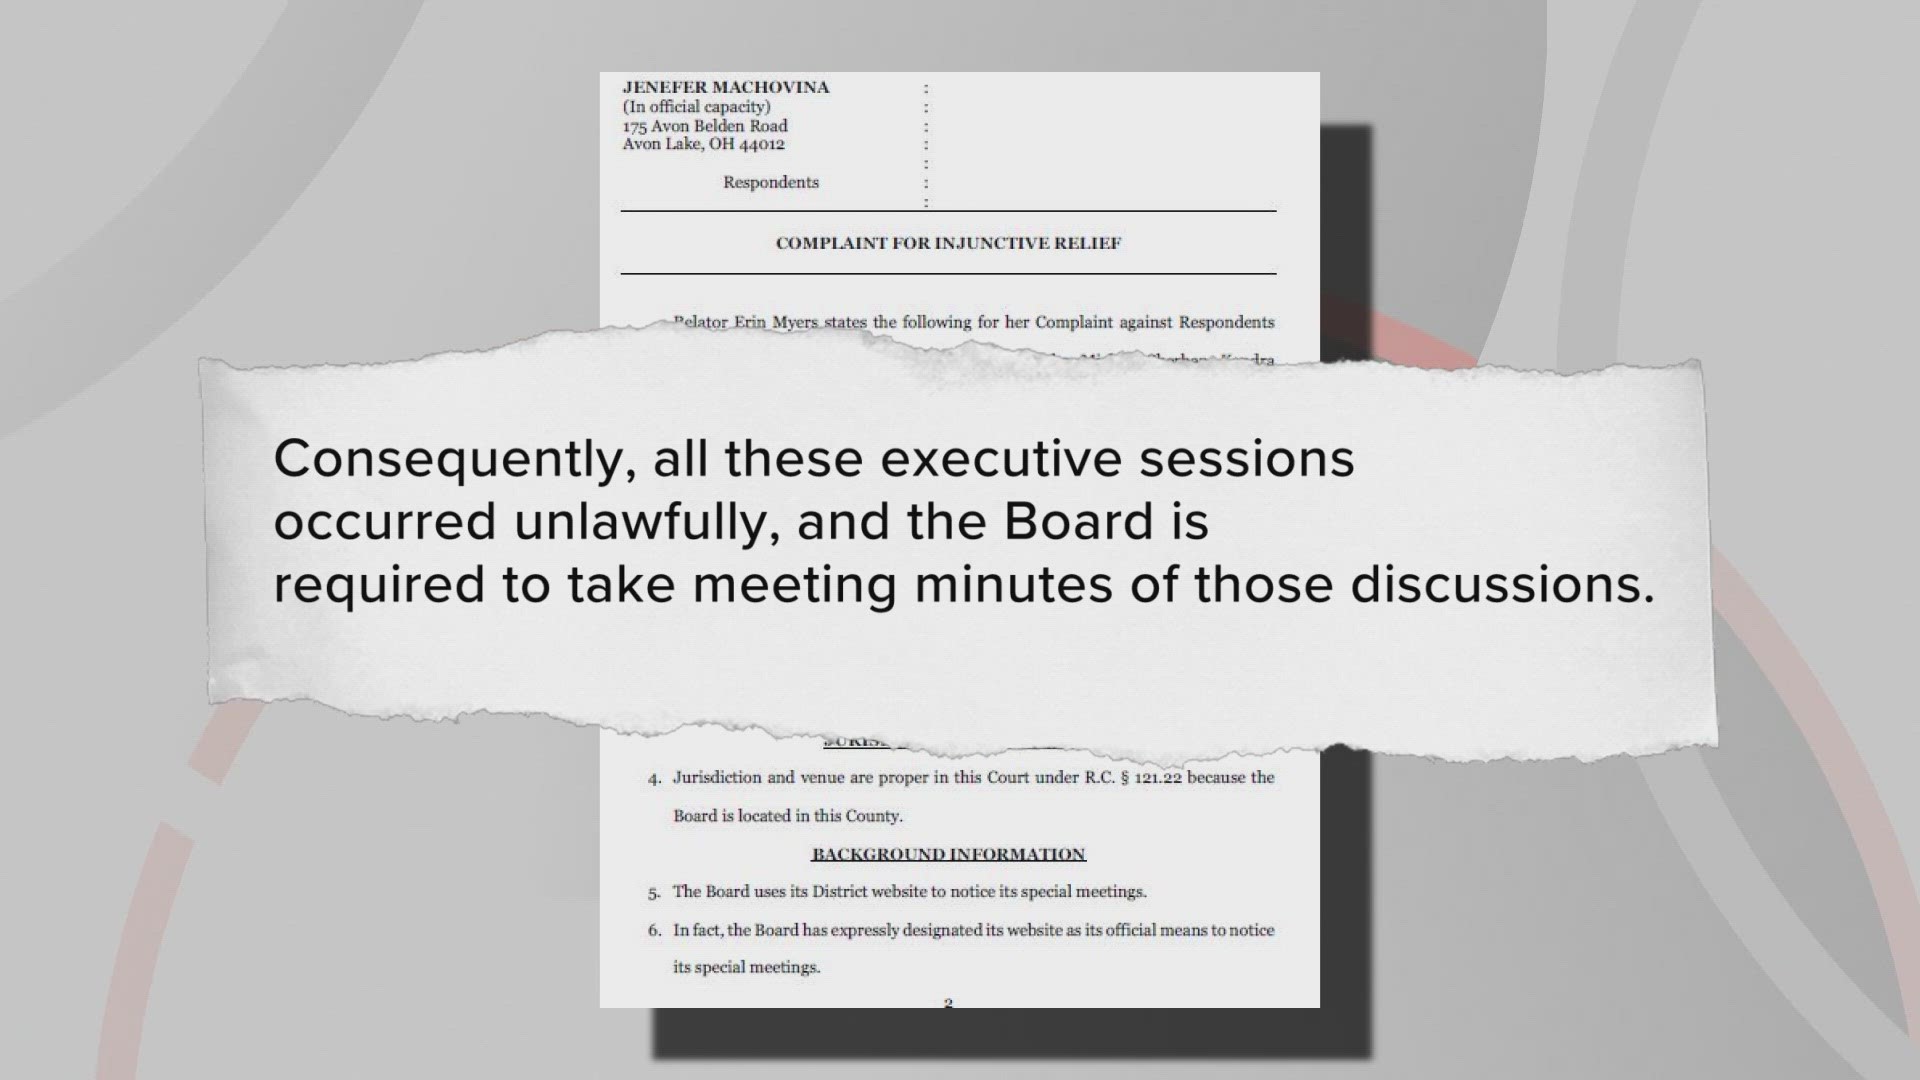 The suit claims the board failed to post notices and the purpose of multiple special meetings, including a meeting that approved the new superintendent's contract.